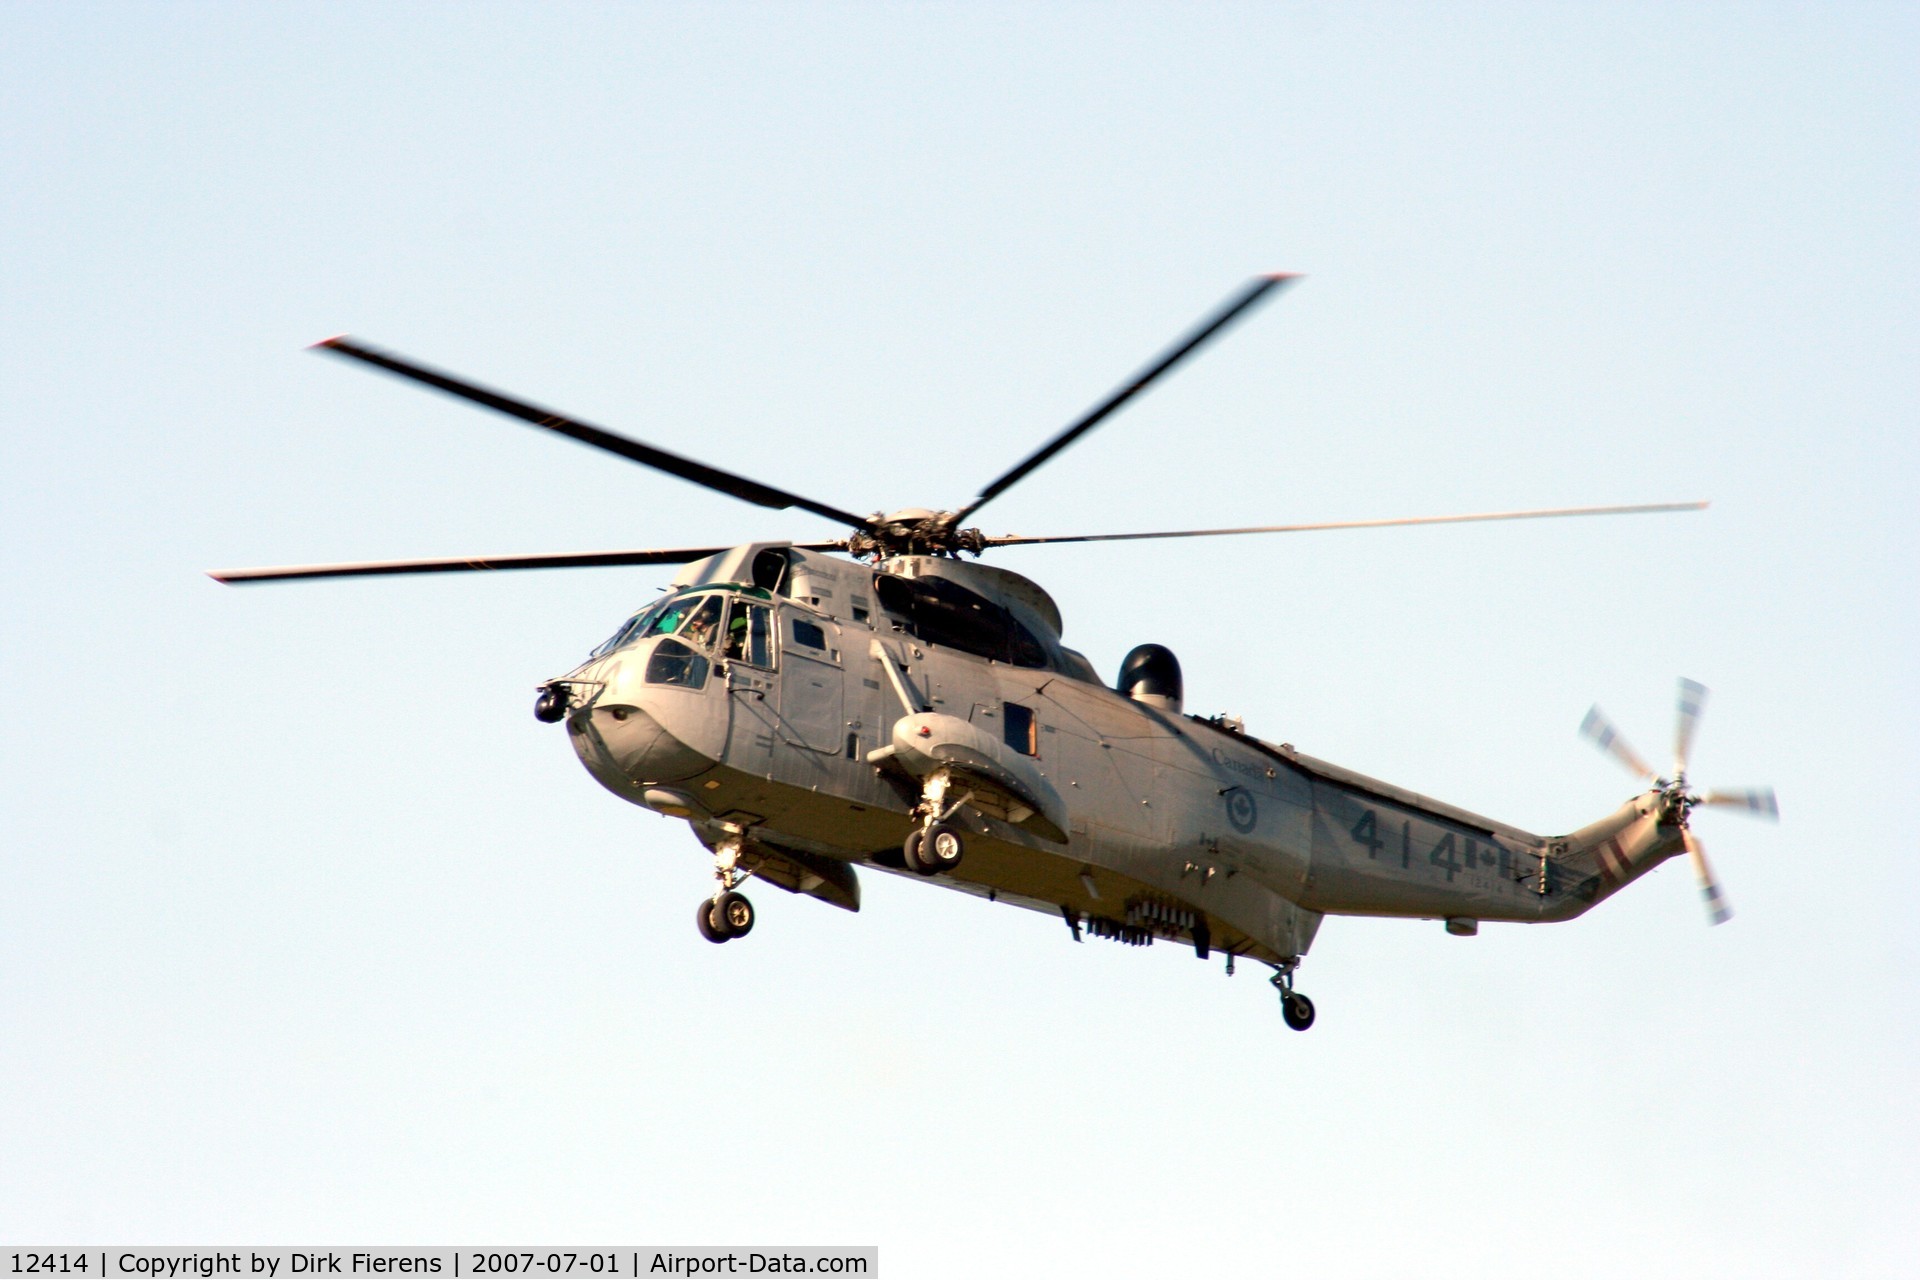 12414, United Aircraft of Canada CH-124A Sea King C/N 61260, Seaking flyover at Rockcliff, Ont. Canada